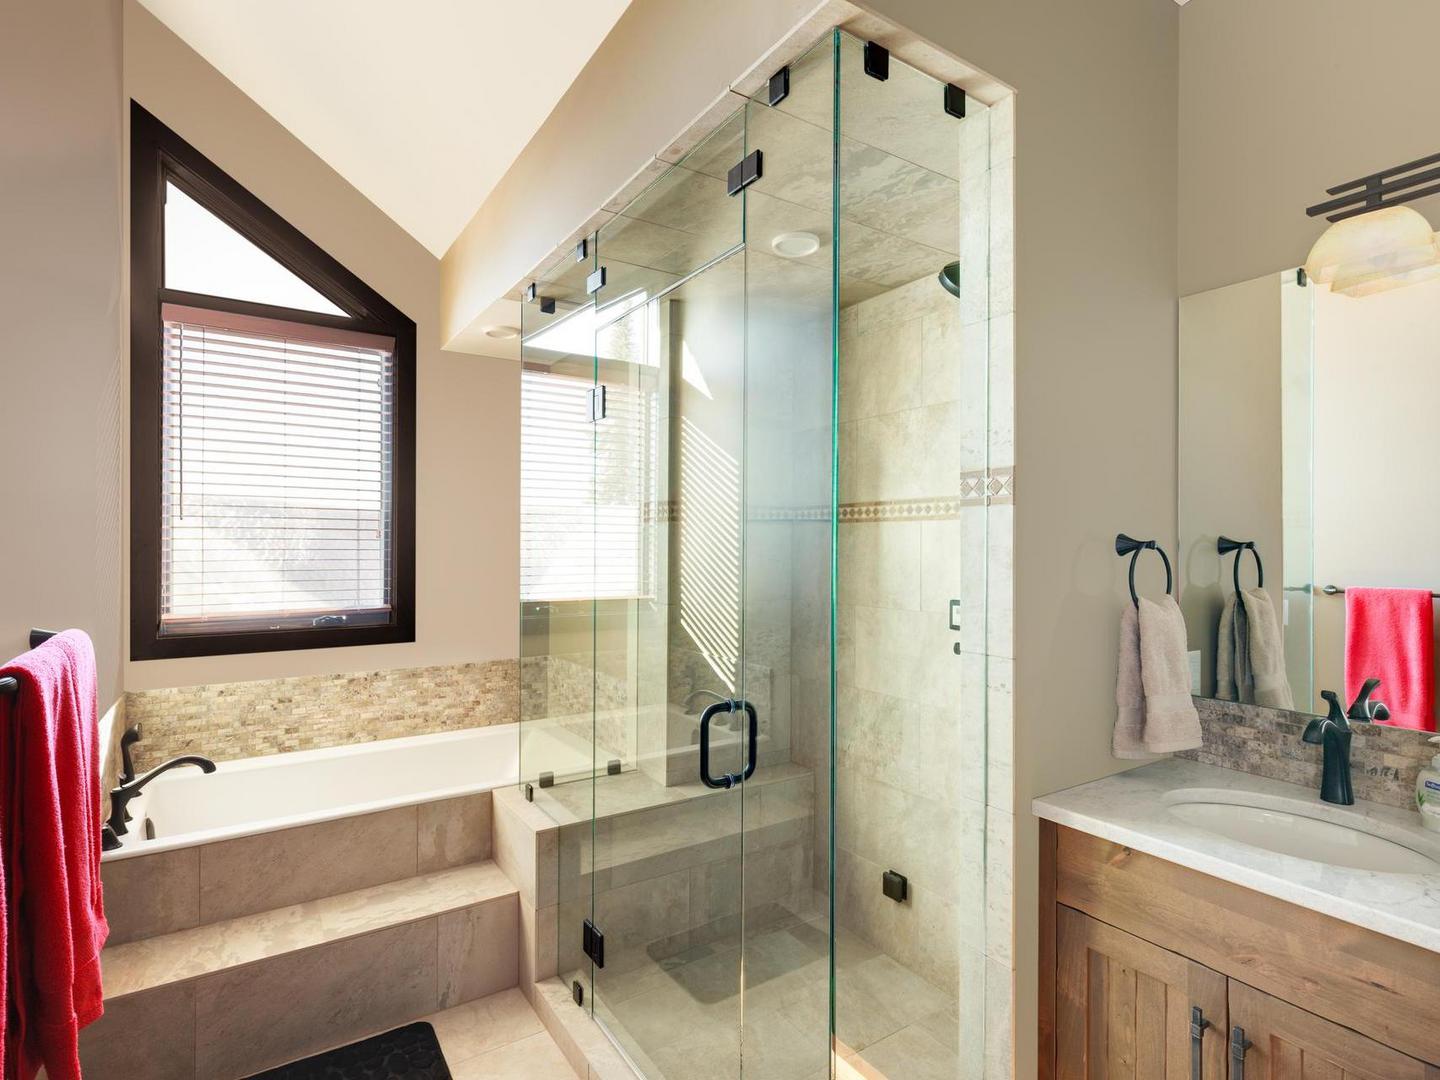 The luxury, spa-like master bedroom ensuite with a walk-in steam shower, soaker tub, bright natural light and high-end finishes in White Caviar at Big White Ski Resort.